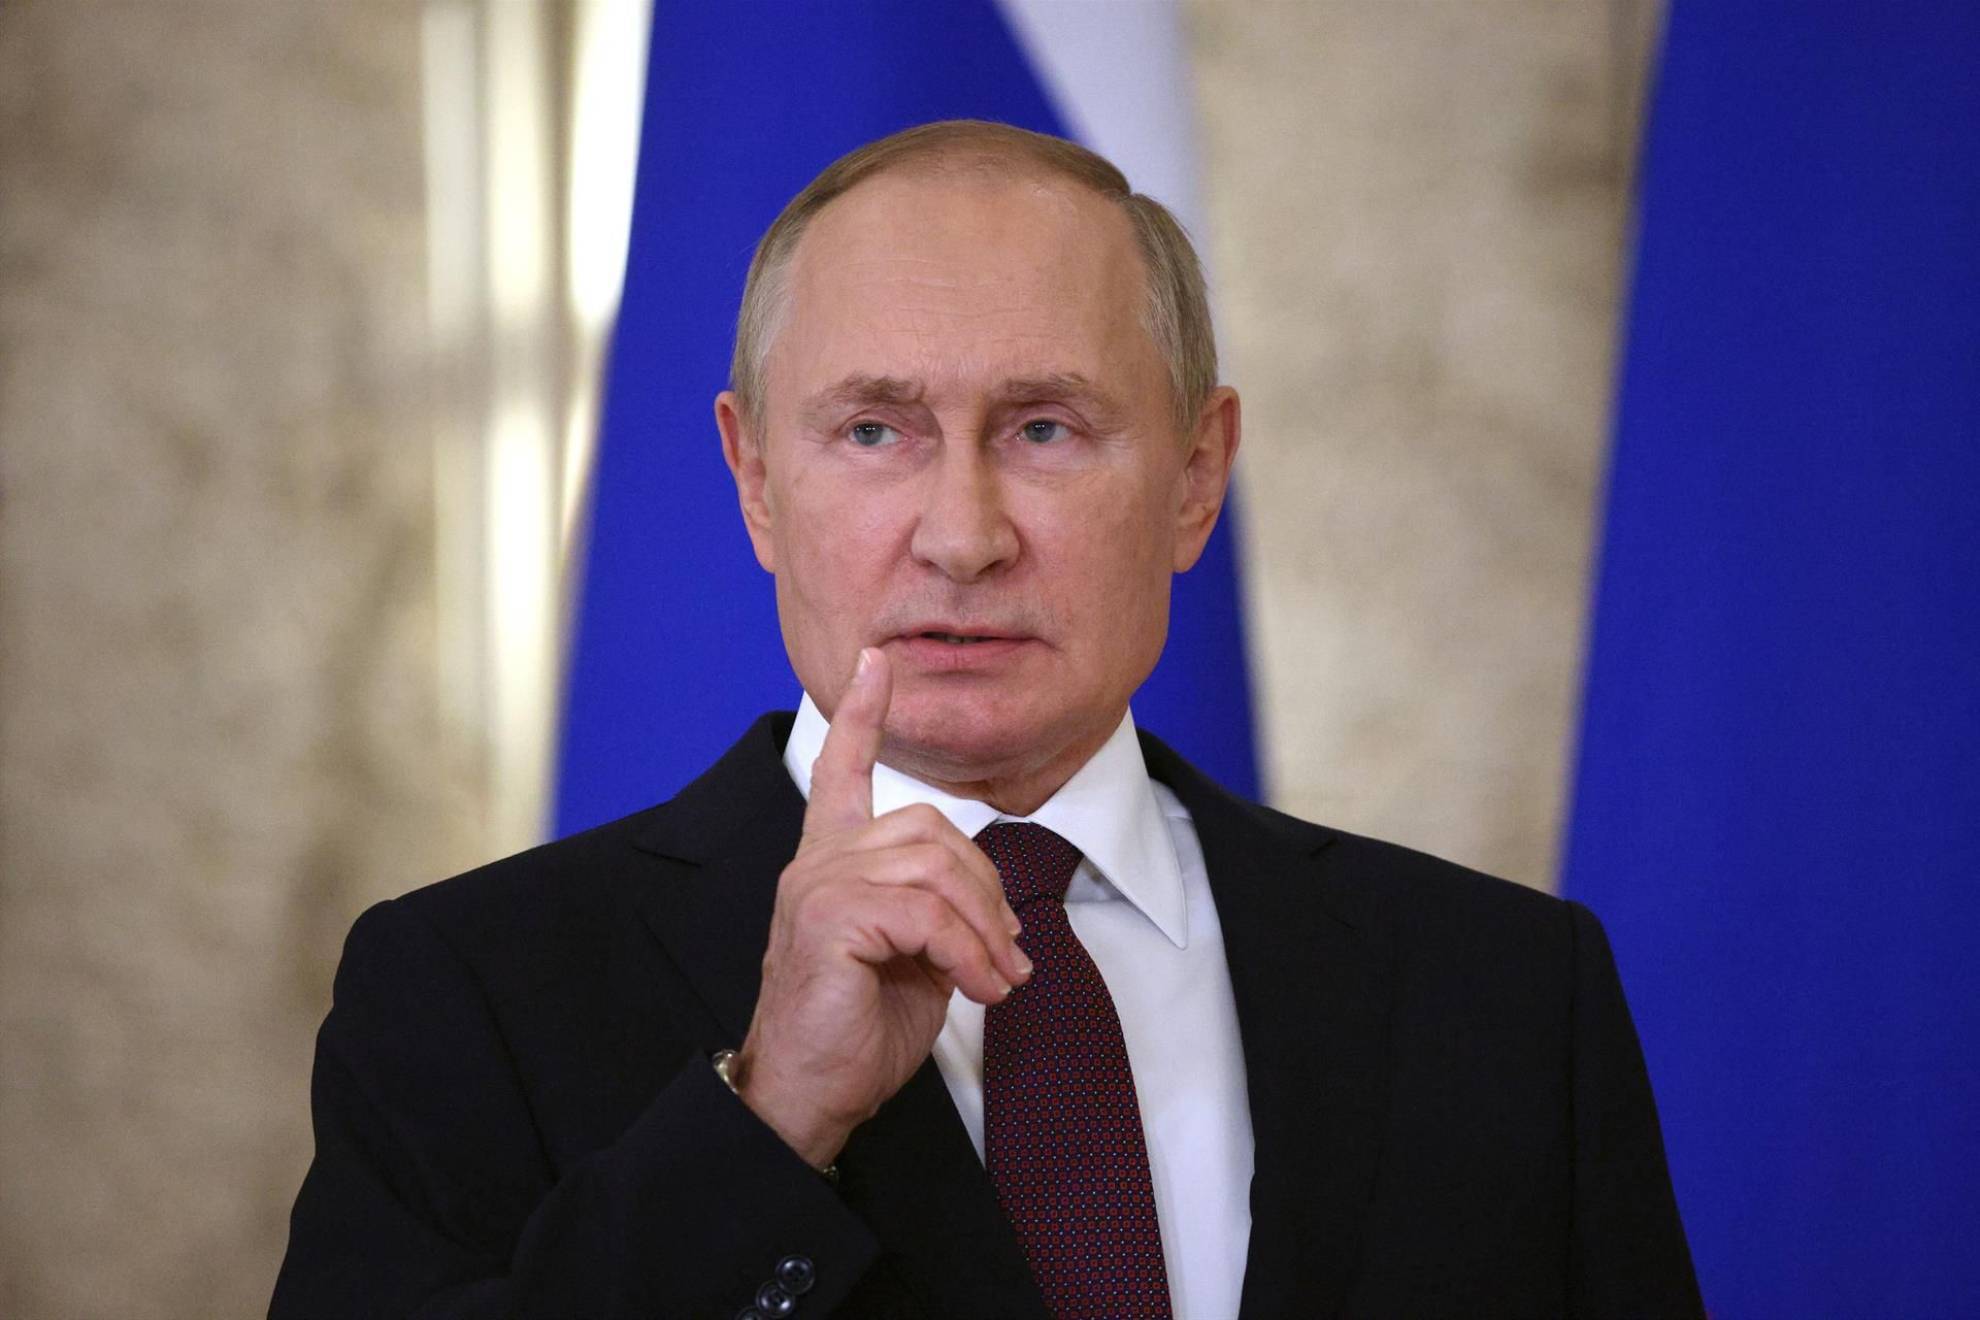 Find out why Putin is guaranteed to win Russias election